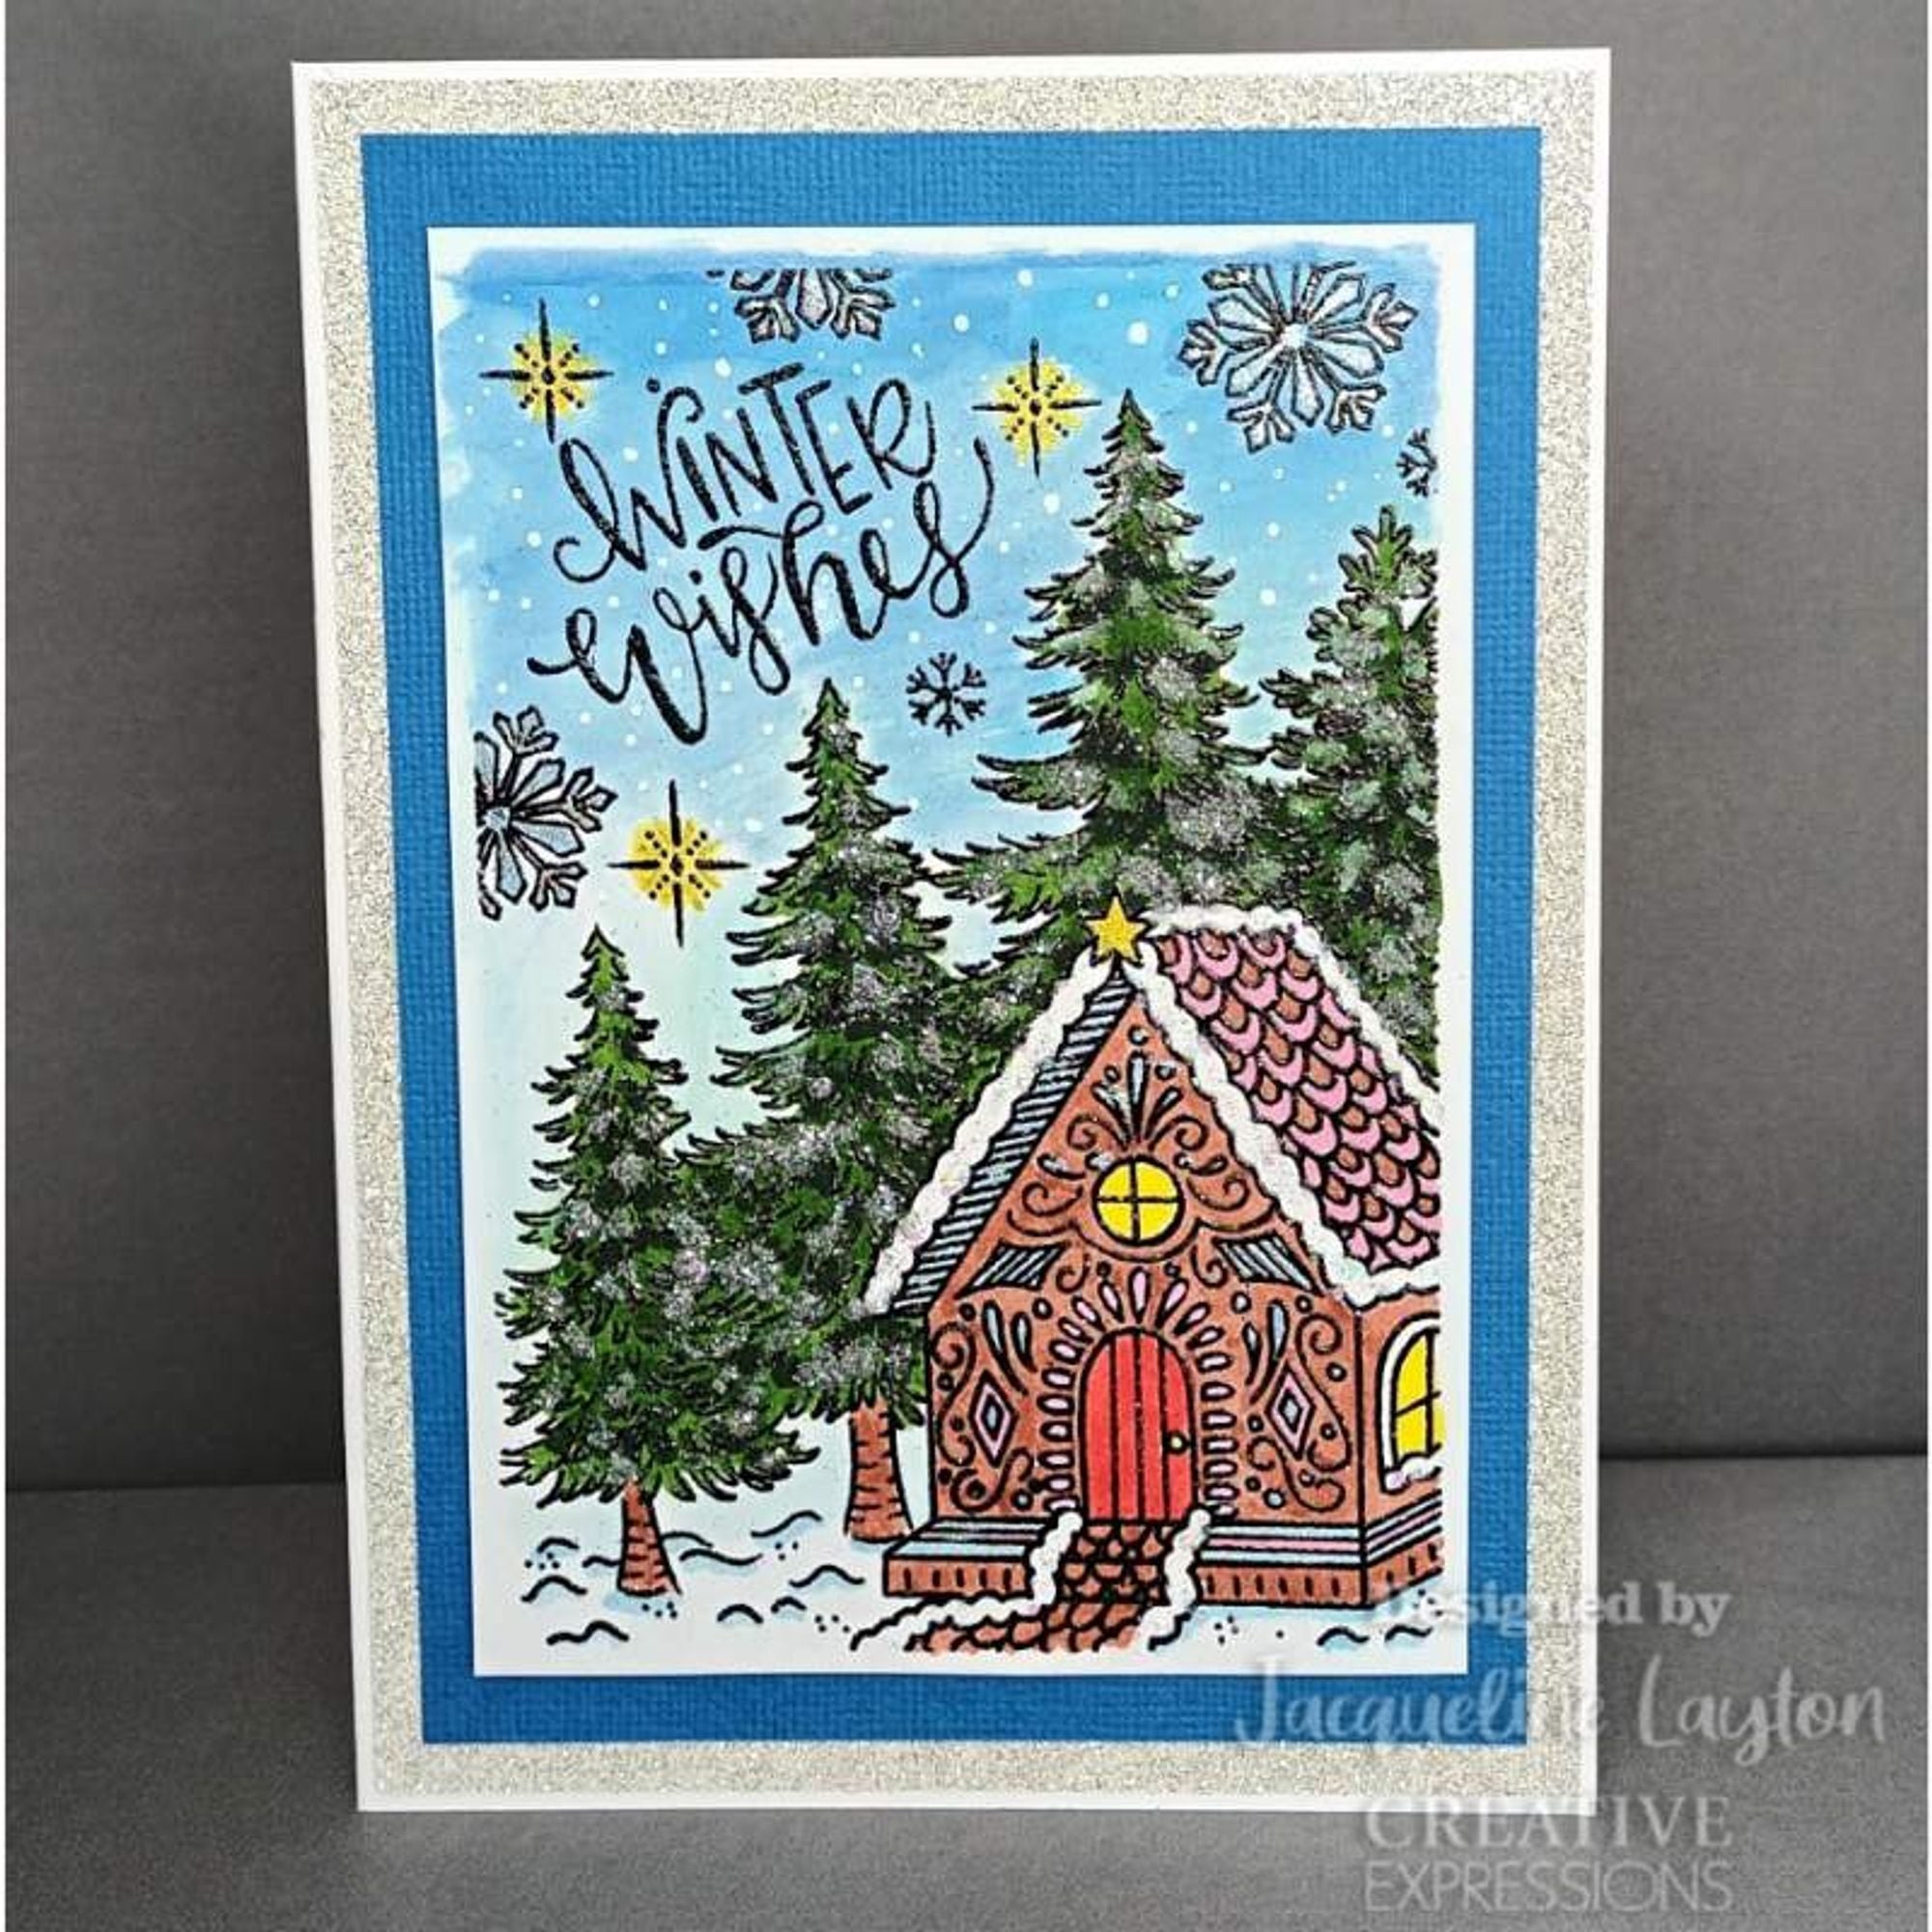 Creative Expressions Designer Boutique Gingerbread Cottage 6 in x 4 in Clear Stamp Set